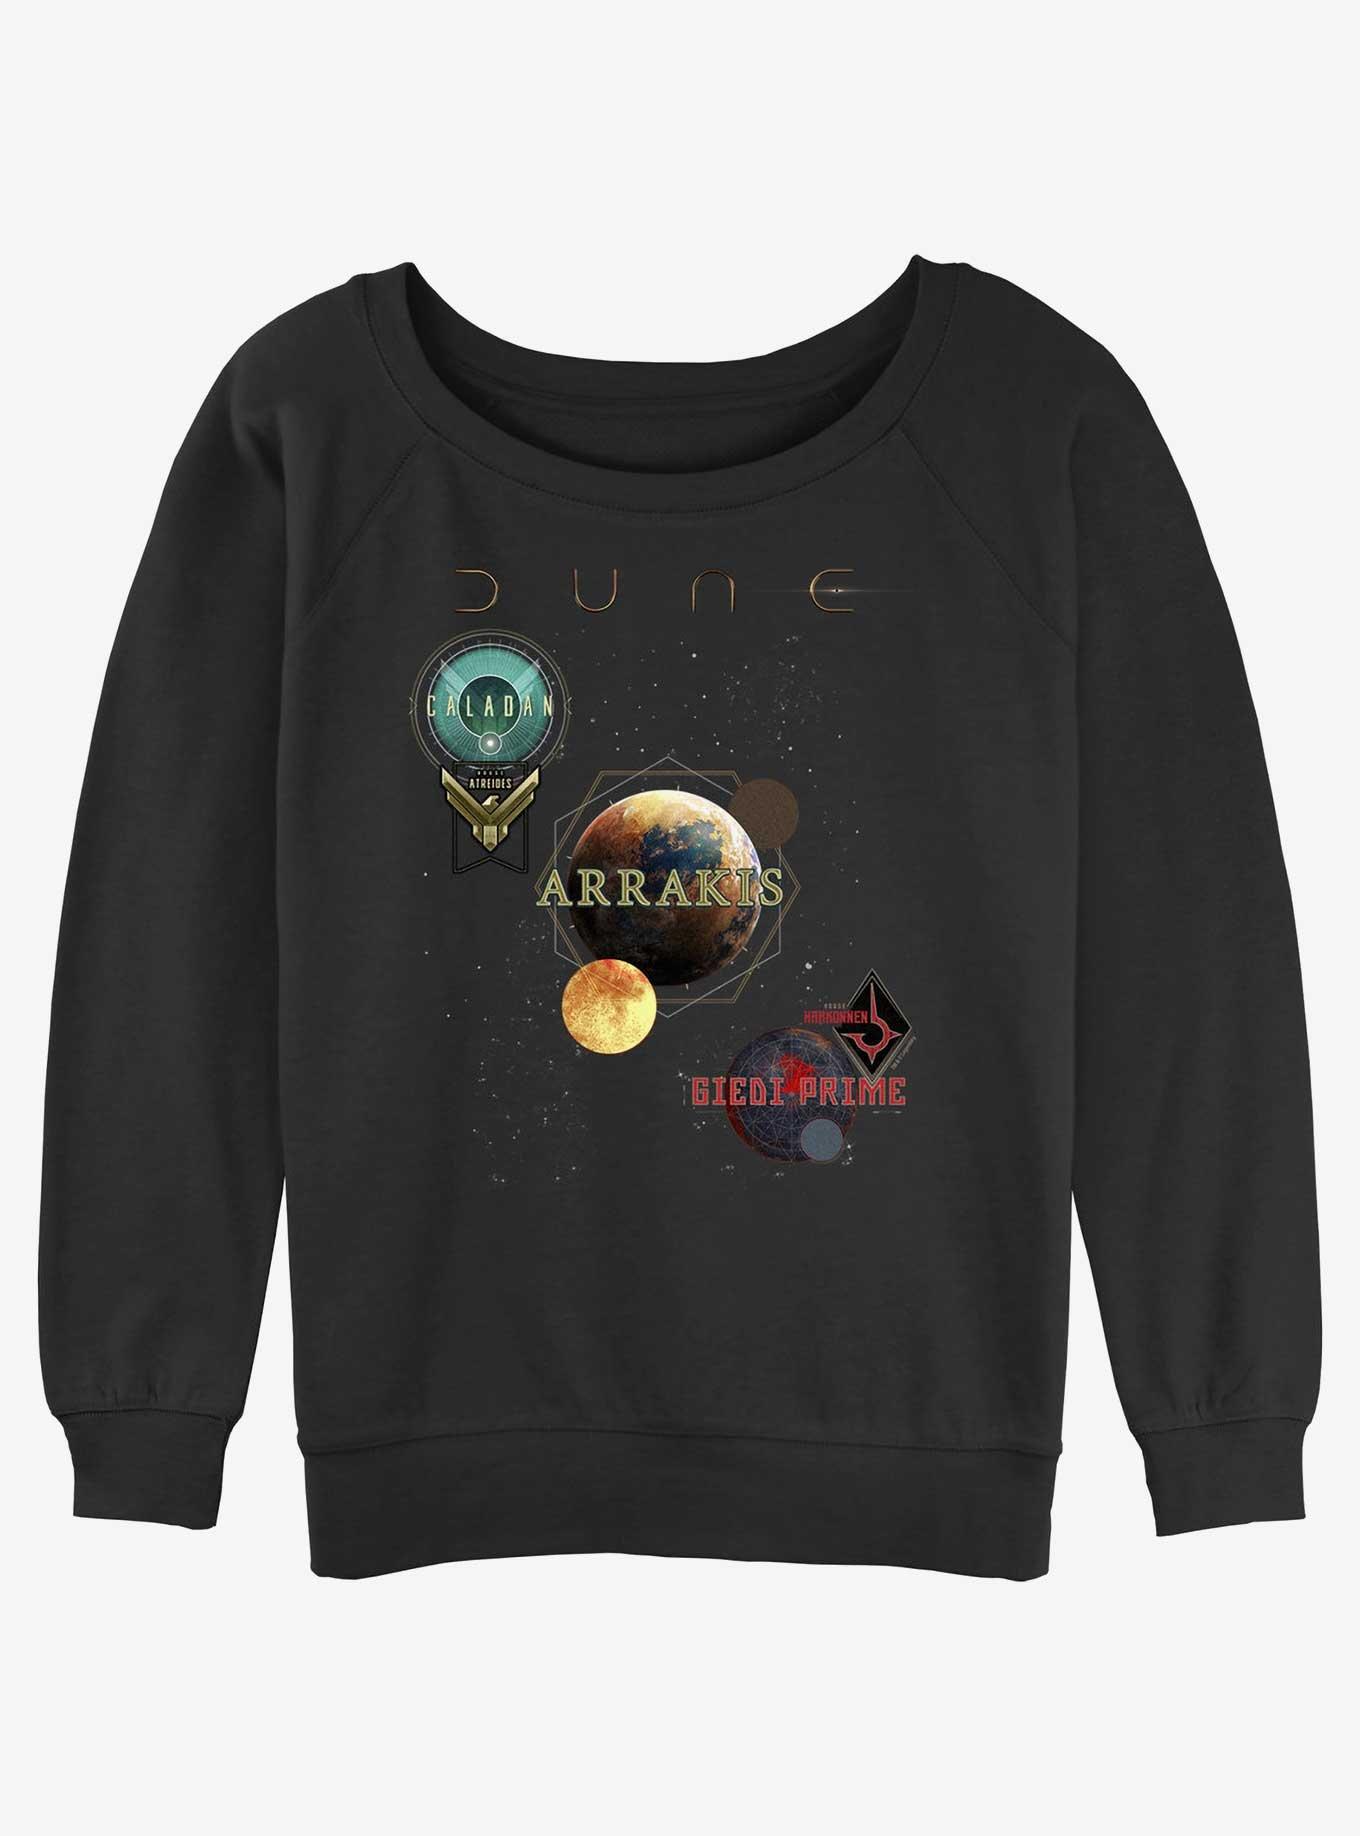 Dune: Part Two Planets Poster Girls Slouchy Sweatshirt